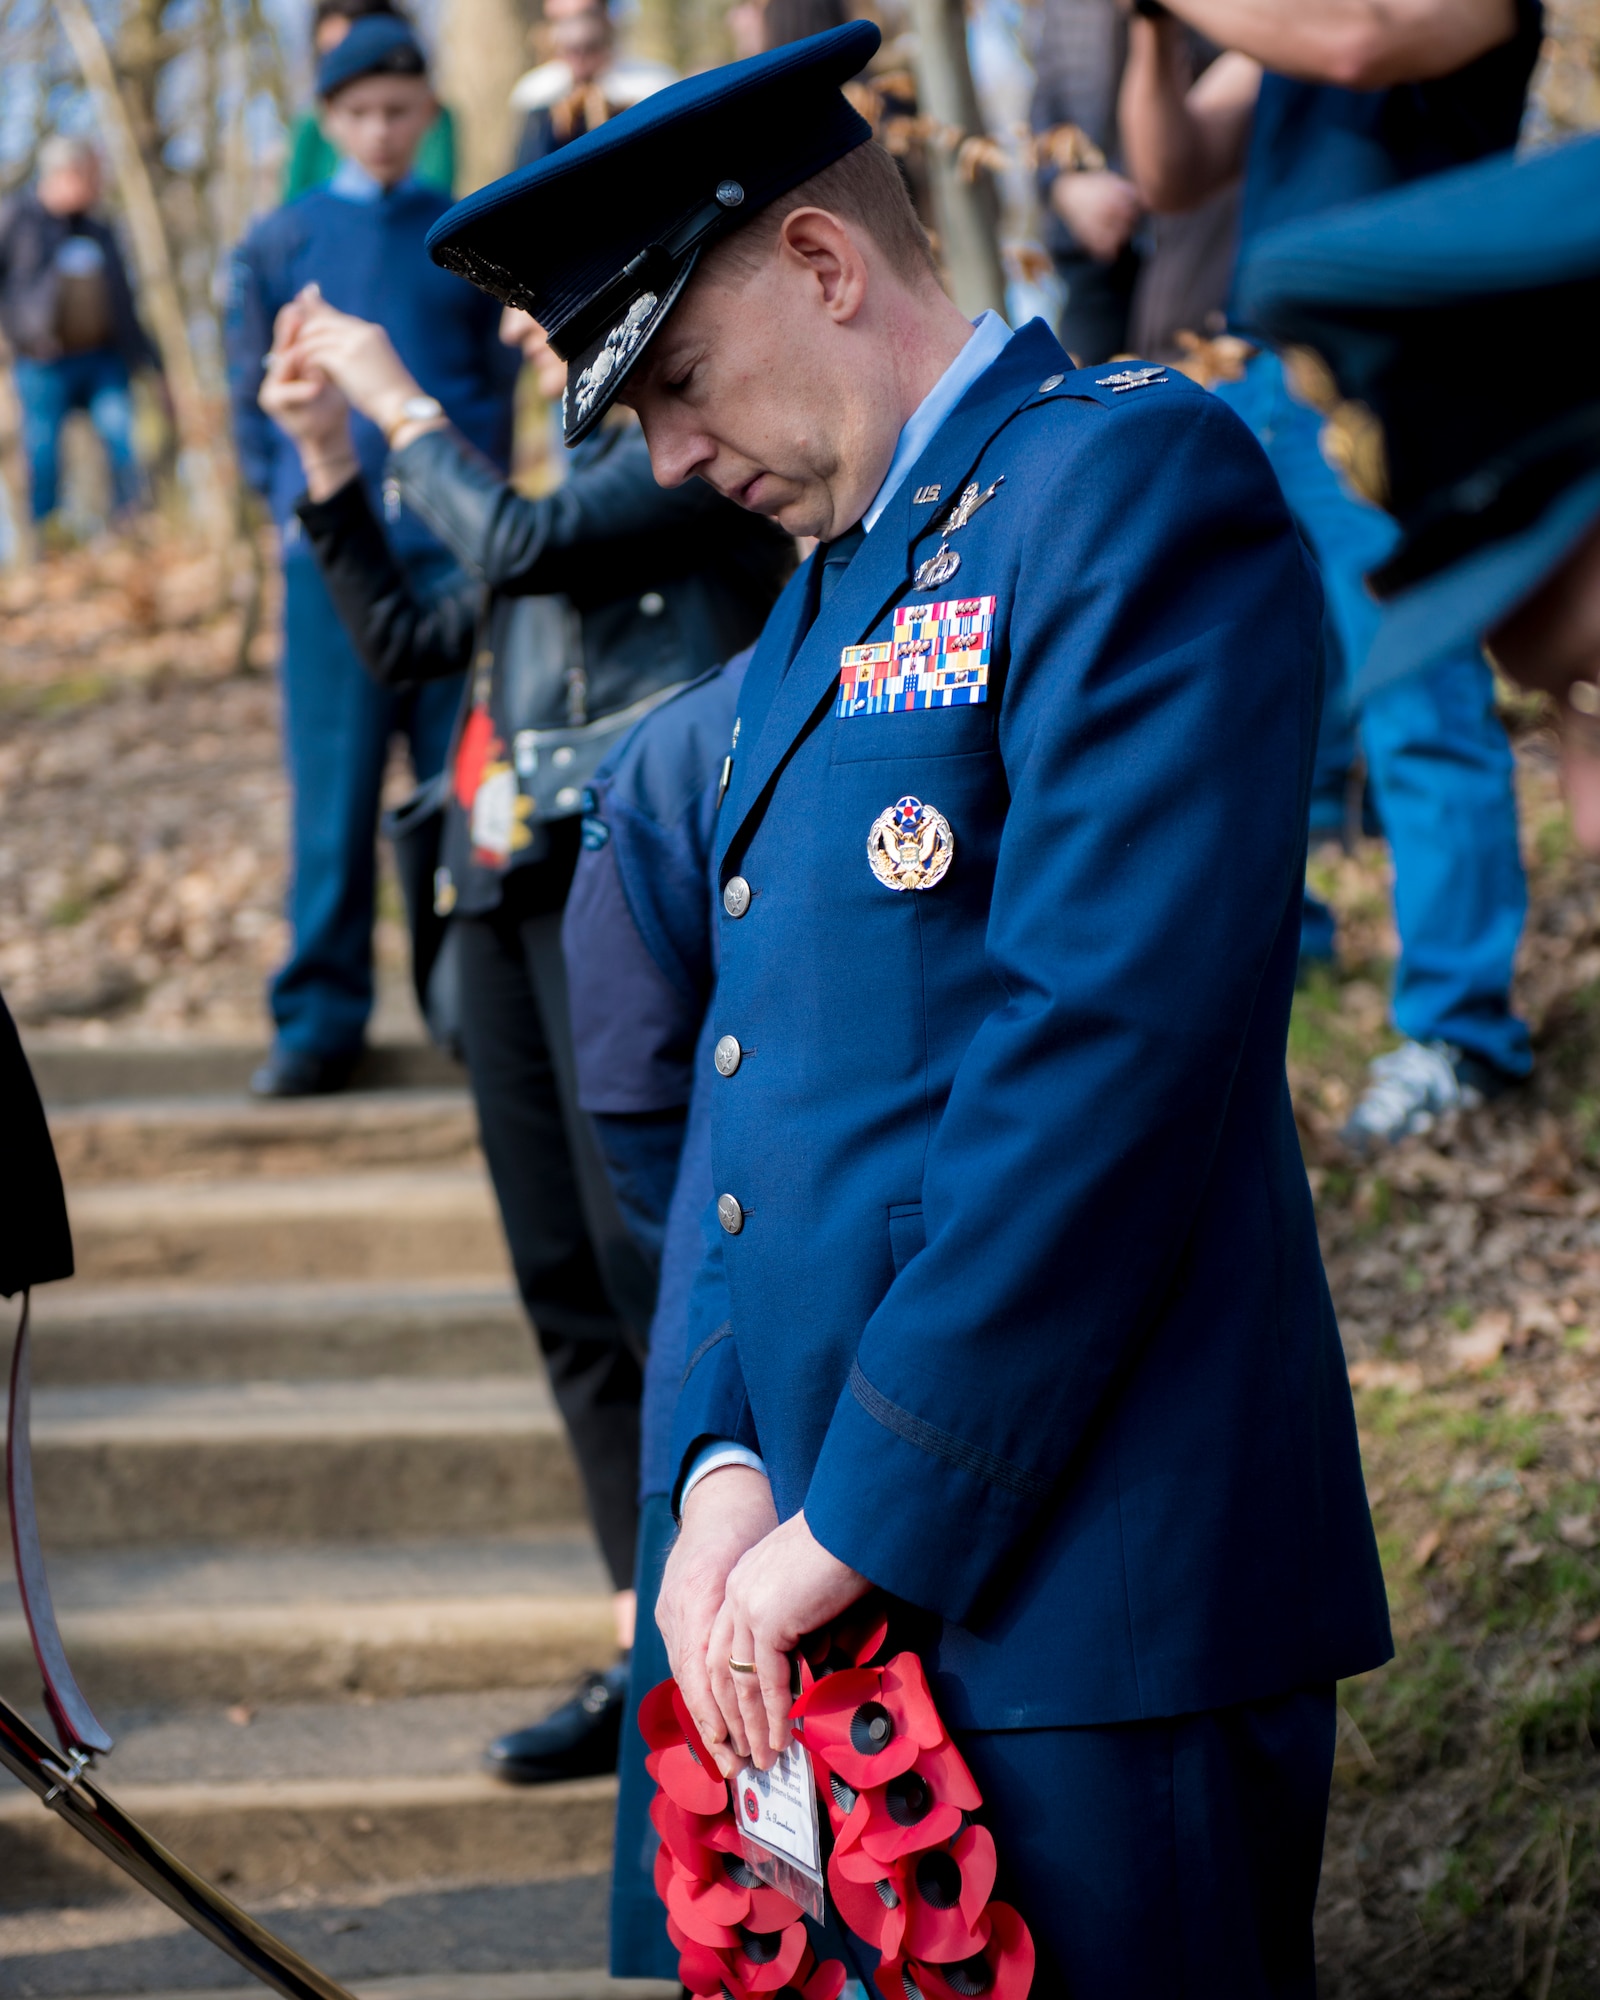 U.S. Air Force Colonel James Smith, RAF Menwith Hill Air Force Element Commander, prepares to lay a wreath in honor of the Mi Amigo crewmen at Sheffield, United Kingdom, February 24th, 2019. This year’s annual memorial service was accompanied by a United States Air Force and Royal Air Force flypast in Endcliffe Park two days prior, where thousands of U.K. residents honored the memory of ten fallen U.S. Airmen who died when their war-crippled B-17 Flying Fortress crash landed to avoid killing residents and nearby children. (U.S. Air Force photo by Tech Sgt. Aaron Thomasson)